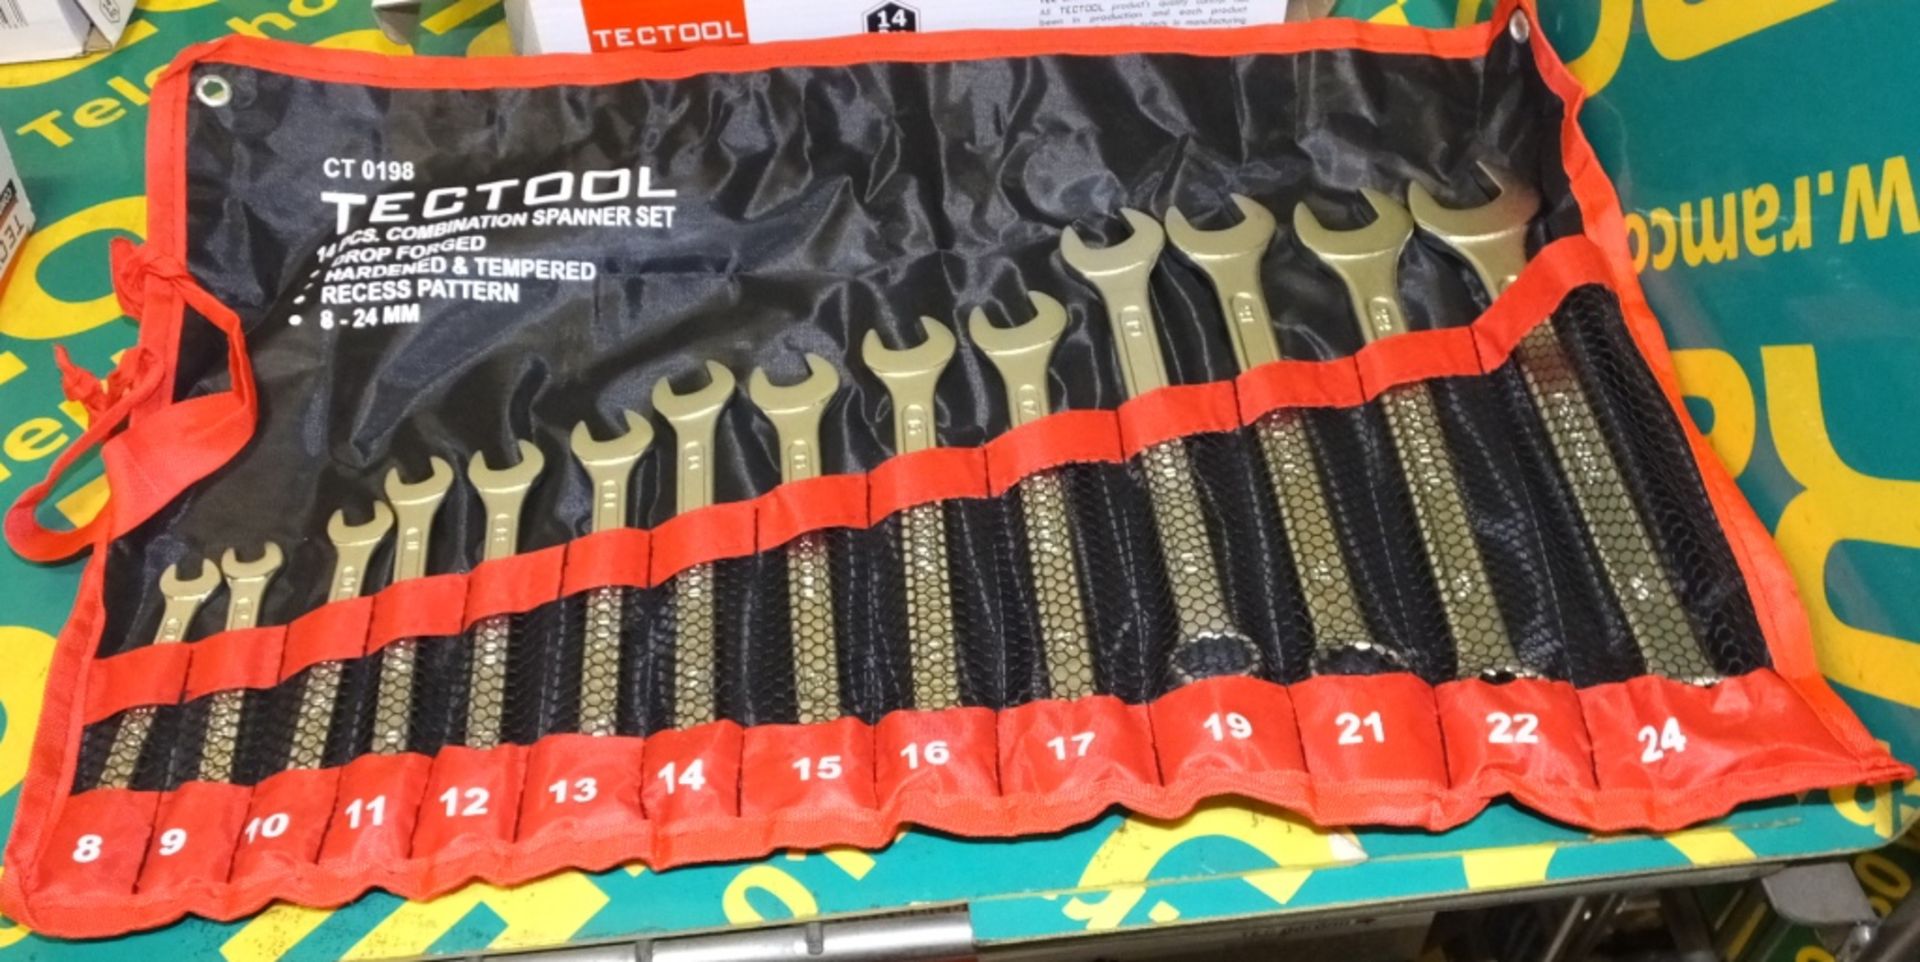 Tectool 14 piece combined spanner set CT0198 - Image 2 of 2